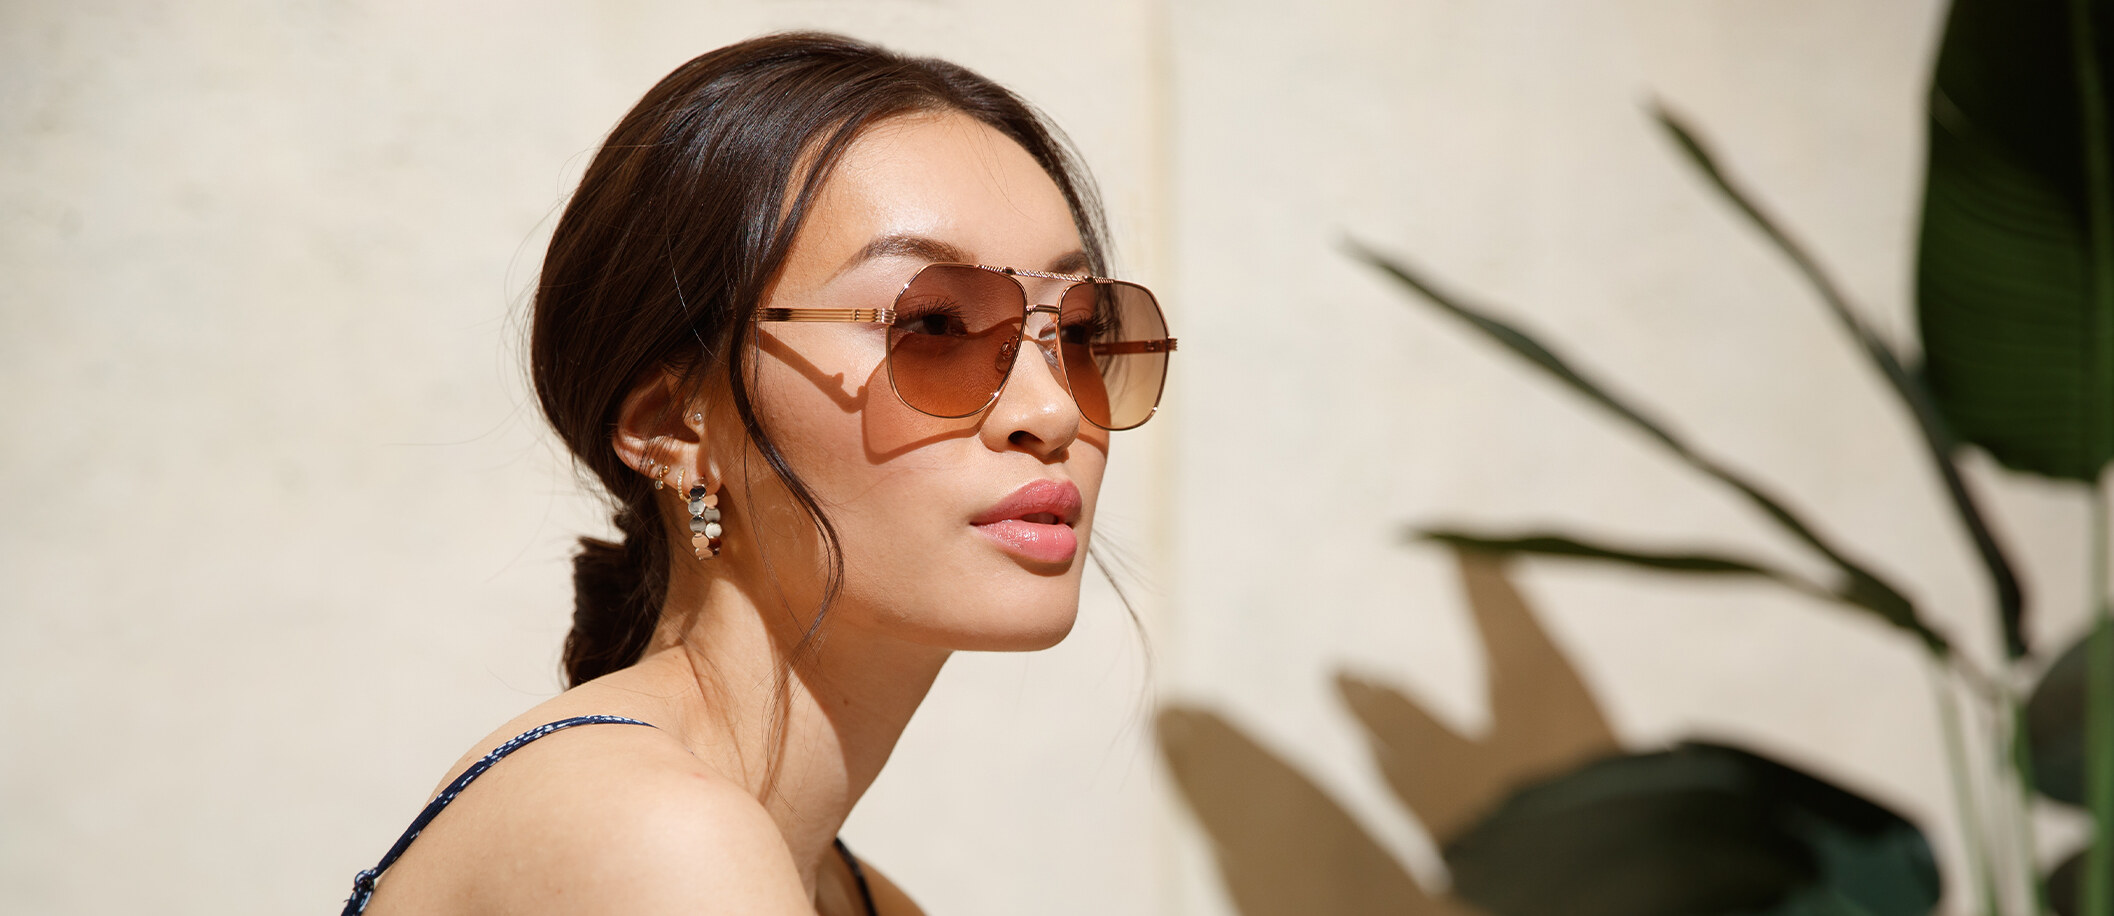 How to Pick the Perfect Sunglasses for Your Face Shape